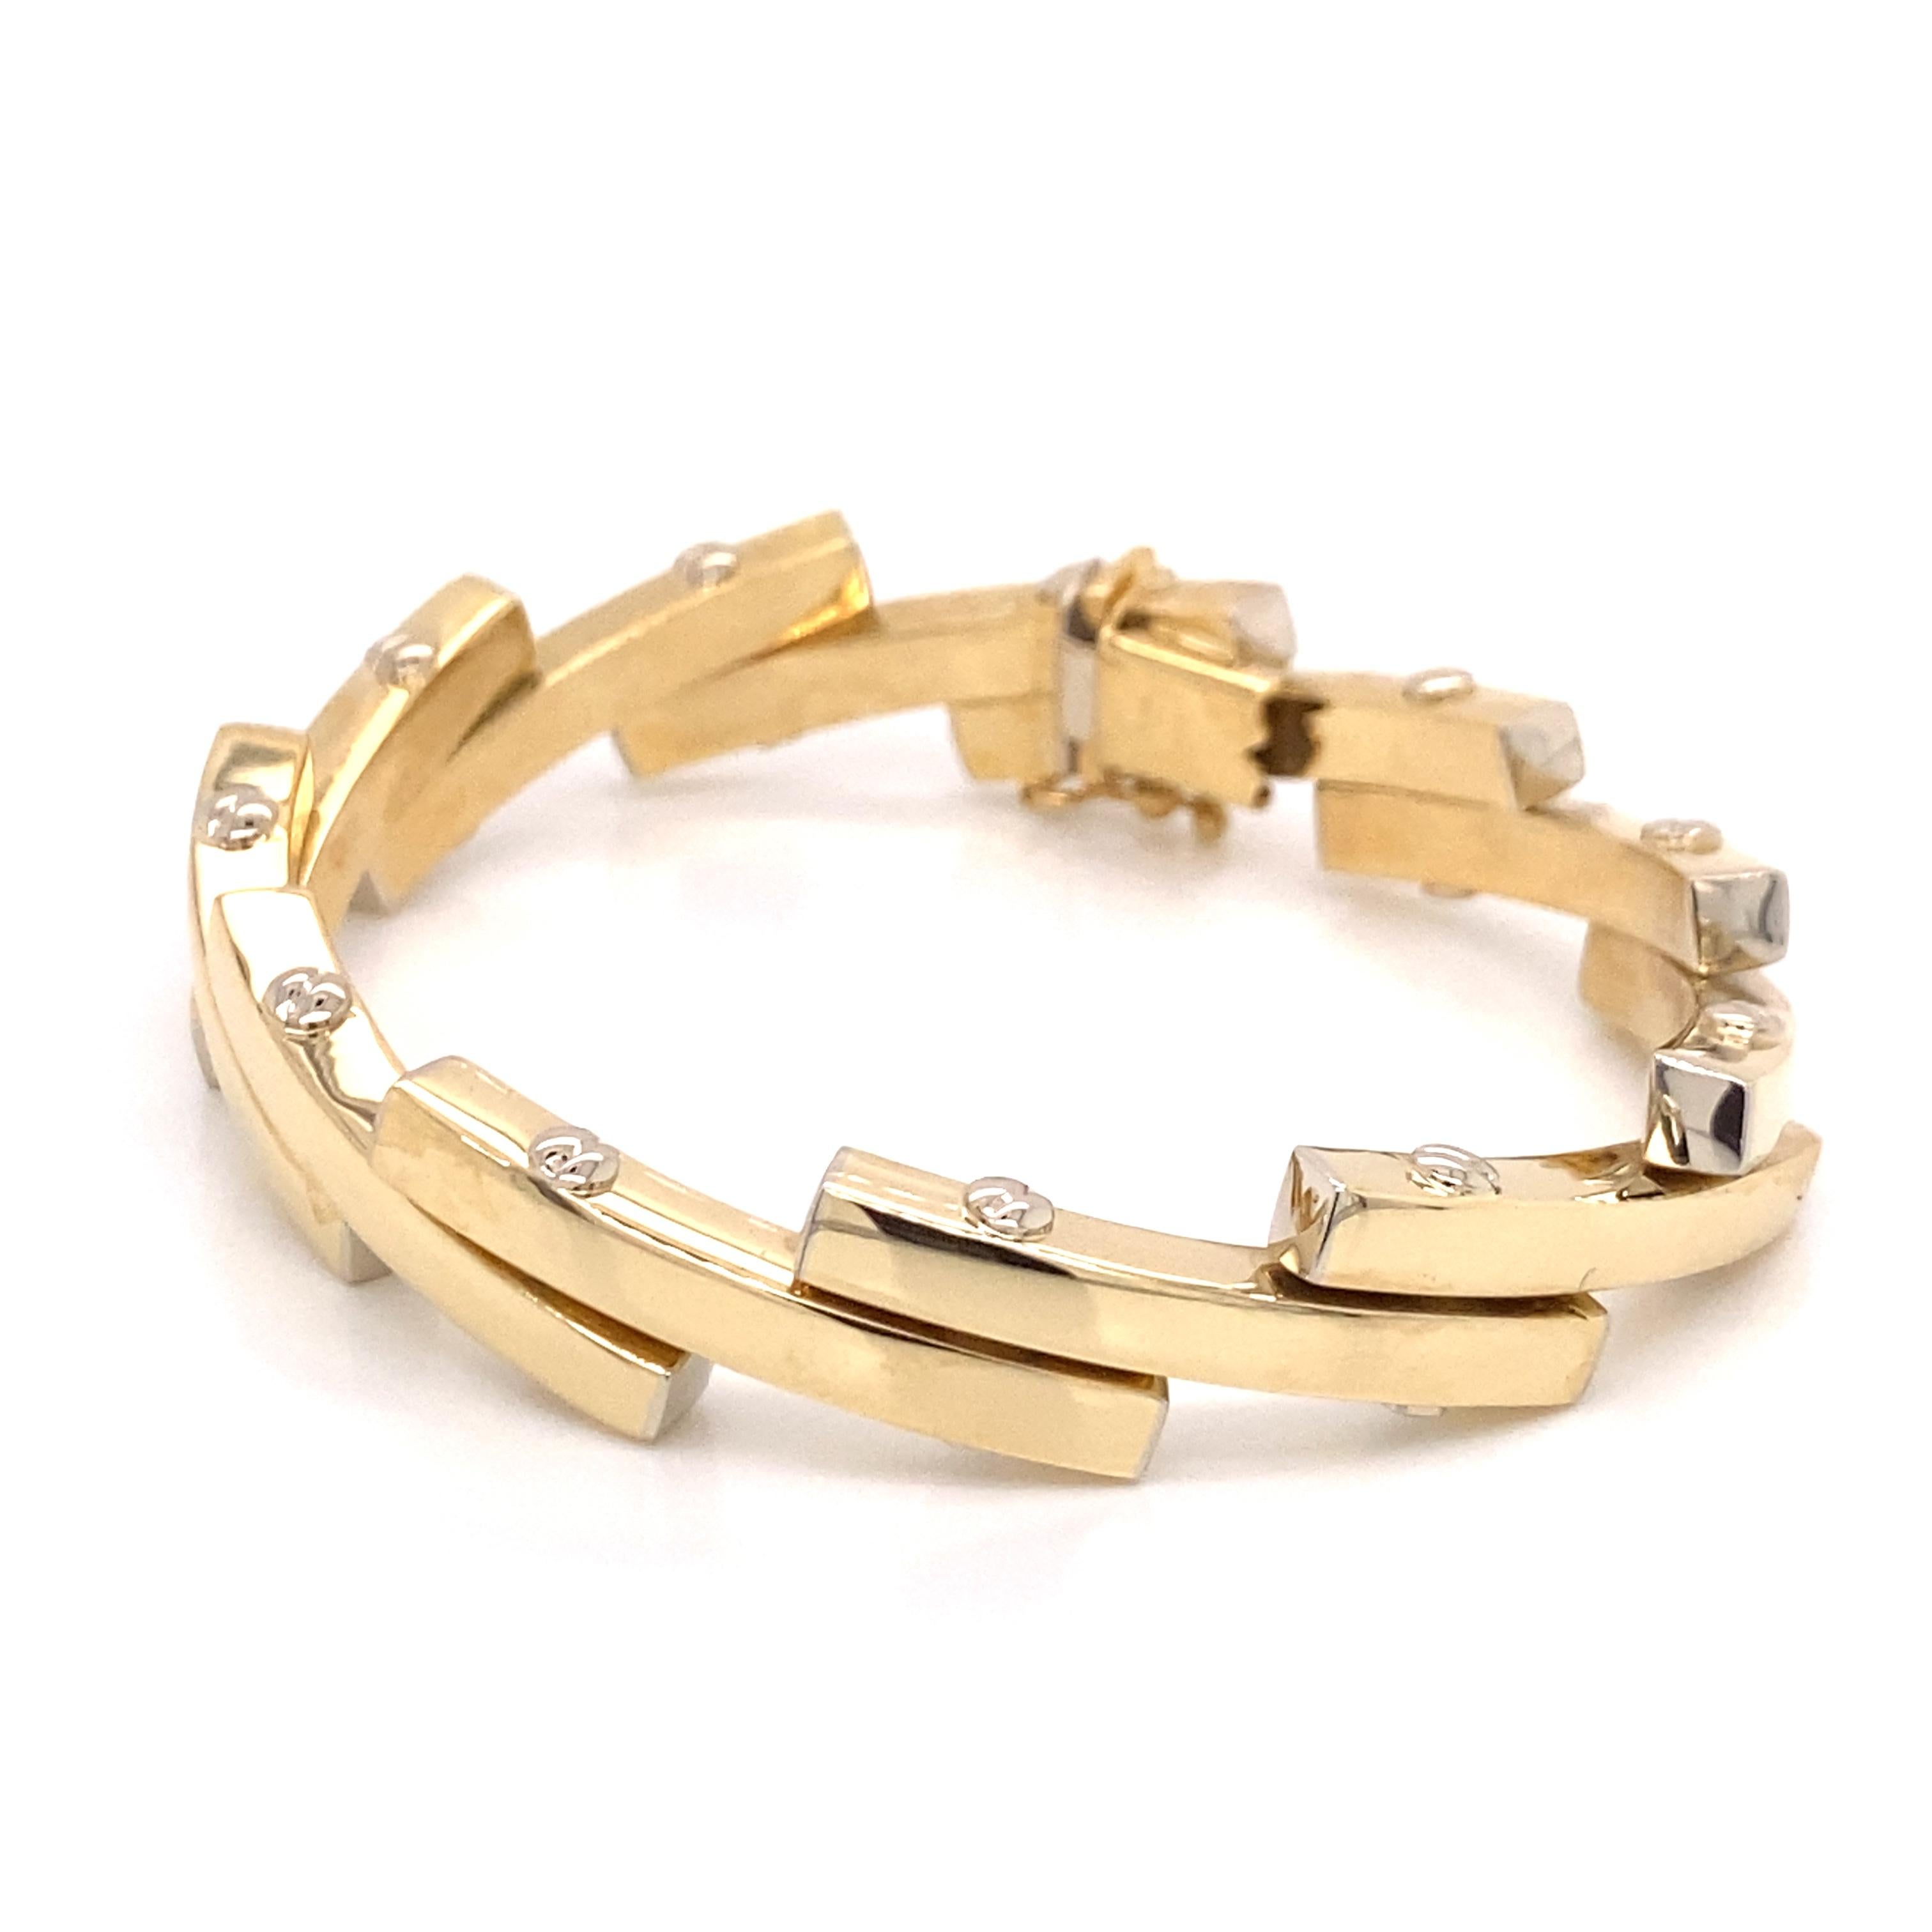 Vintage 1990's 14k Yellow Gold Italian Made Link Bracelet In Good Condition For Sale In Boston, MA